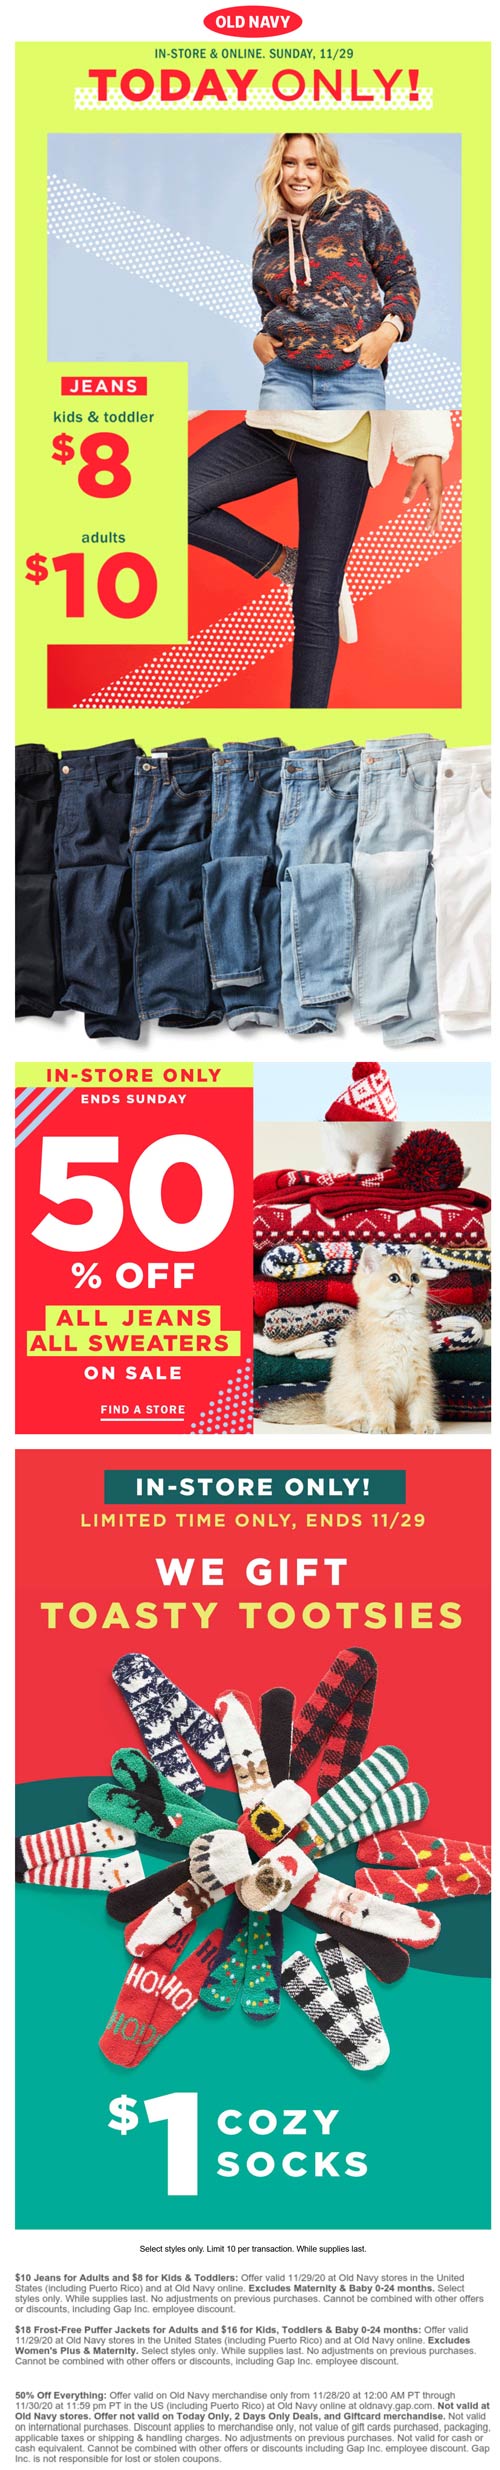 Old Navy stores Coupon  50% off everything online & more + $1 cozy socks & $10 jeans in-store at Old Navy #oldnavy 